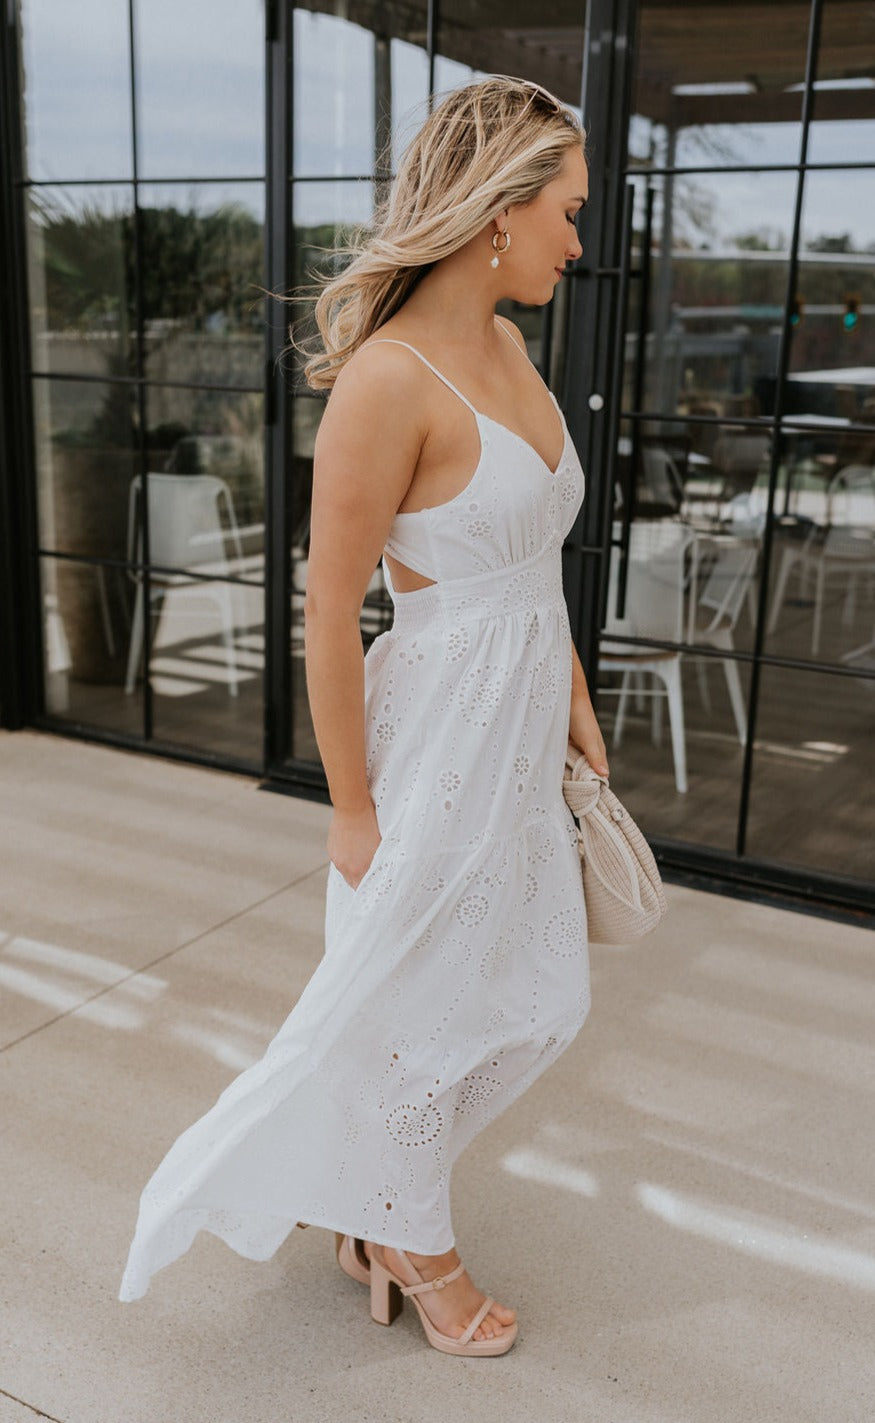 Full body side view of female model wearing the Morgan Off White Eyelet Maxi Dress which features White Lightweight Fabric, Eyelet Pattern, White Lining, Maxi Length, Tiered Body, Sweetheart Neckline, Adjustable Straps and Open Back with Bow Tie